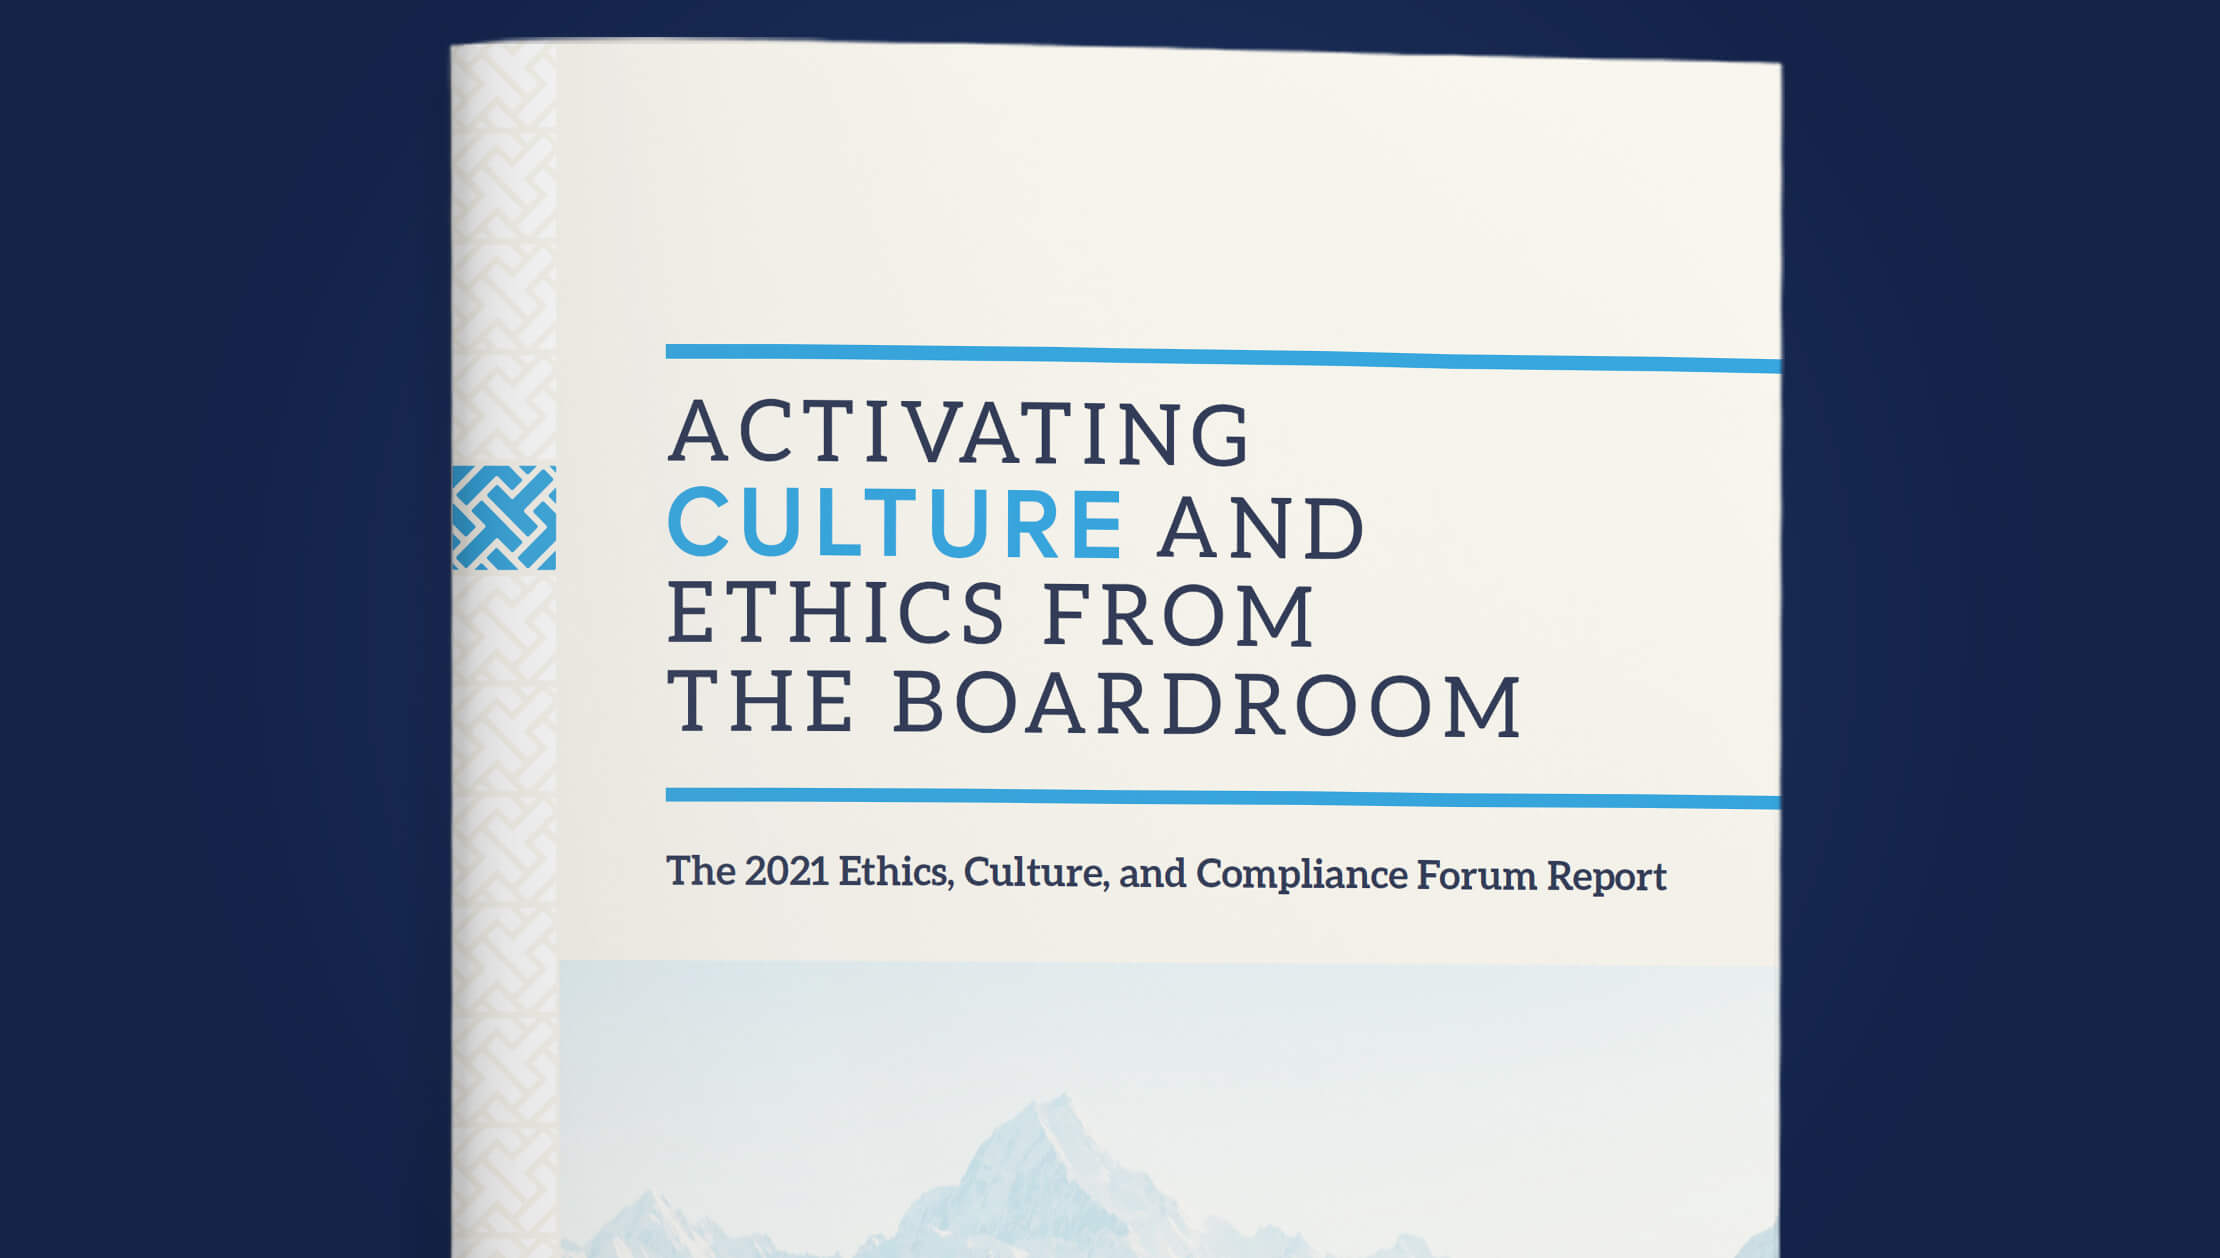 <p>Activating Culture and Ethics from the Boardroom</p>